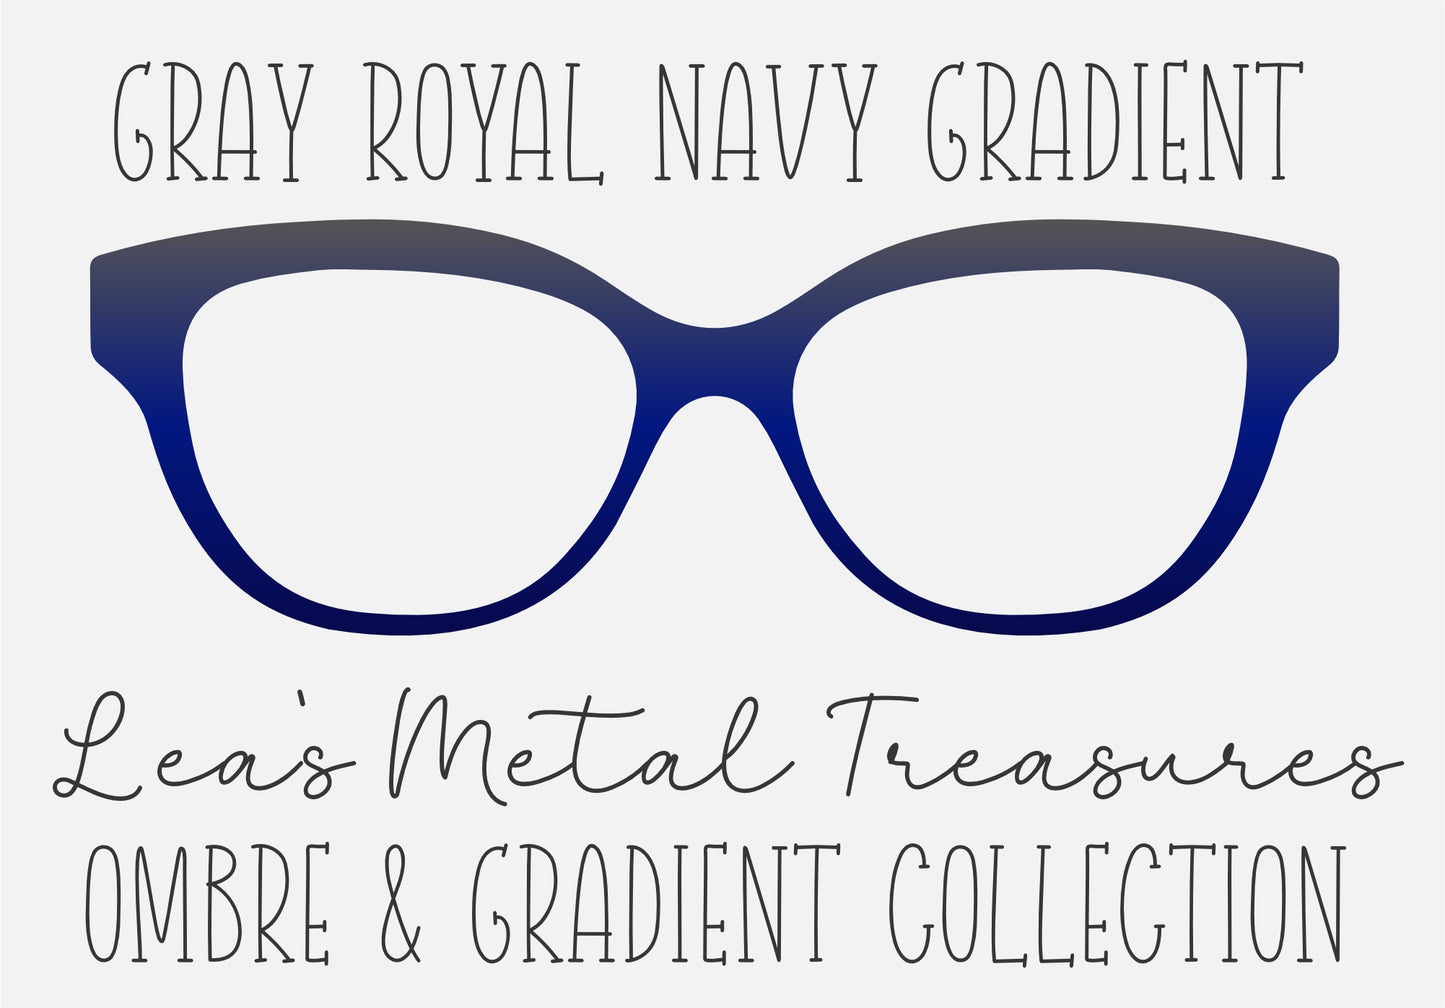 Gray Royal Navy gradient 575455-021780-090642 Eyewear Frame Toppers COMES WITH MAGNETS